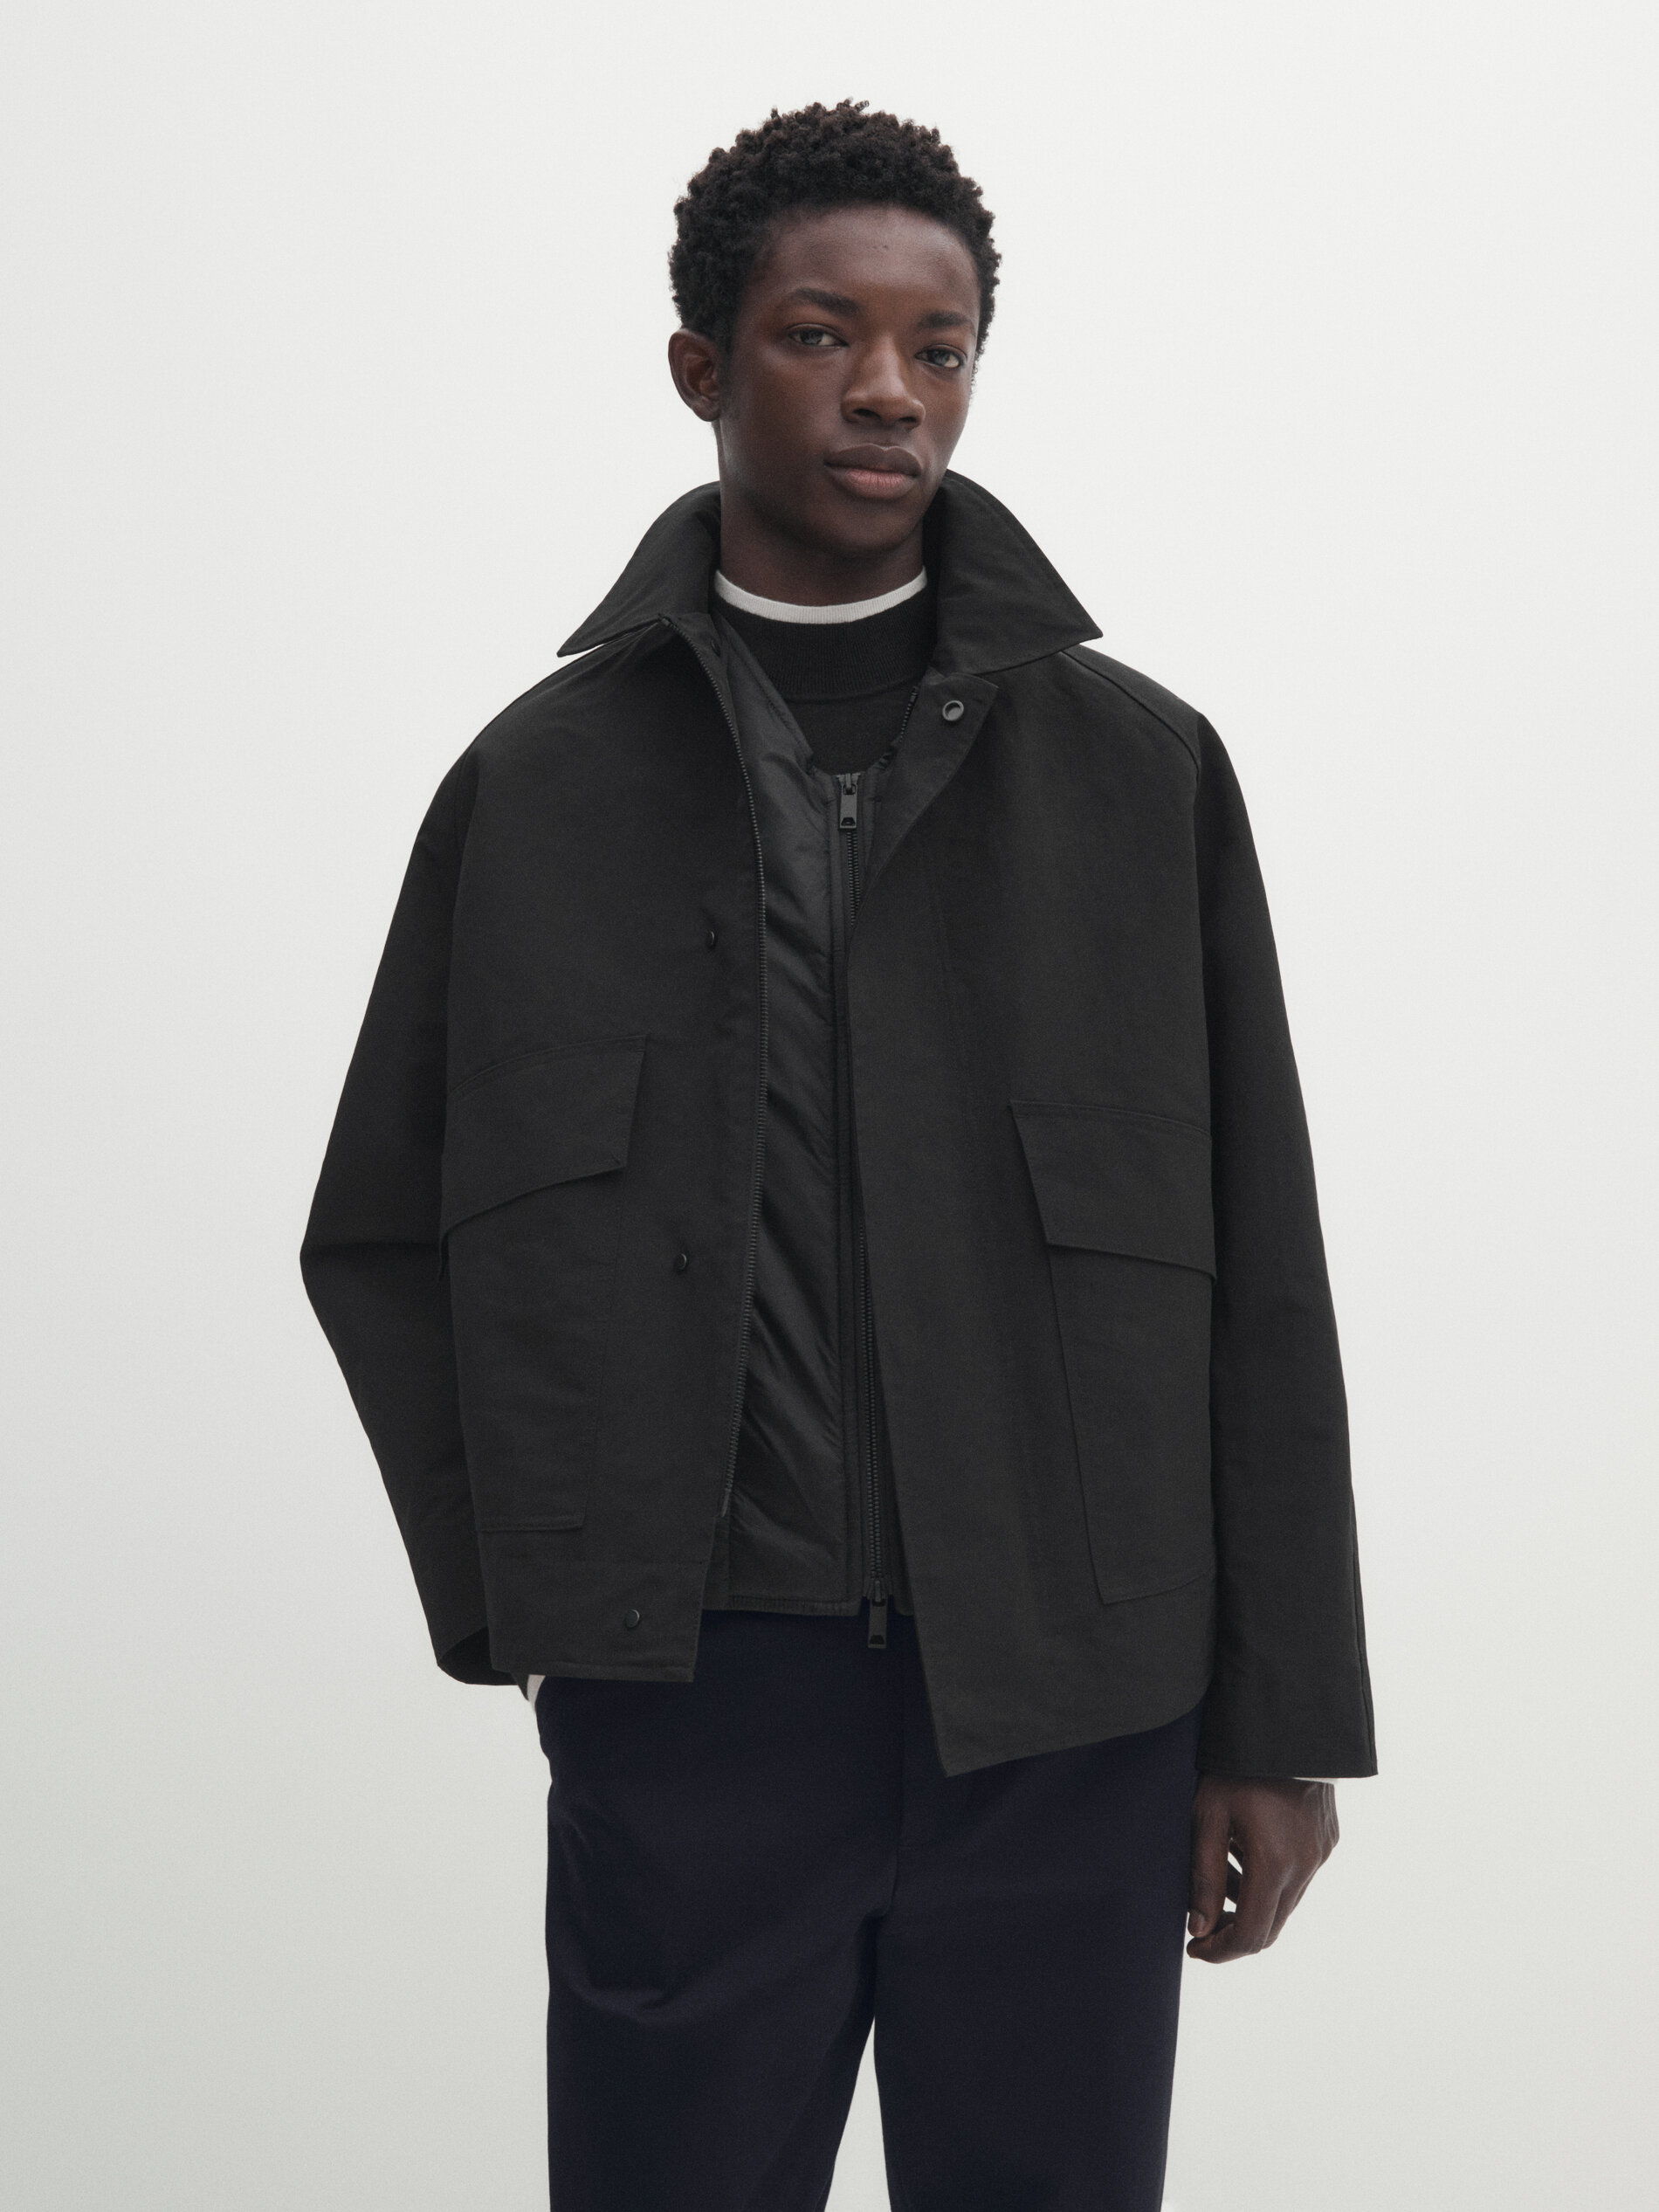 2-in-1 jacket with pockets - Studio